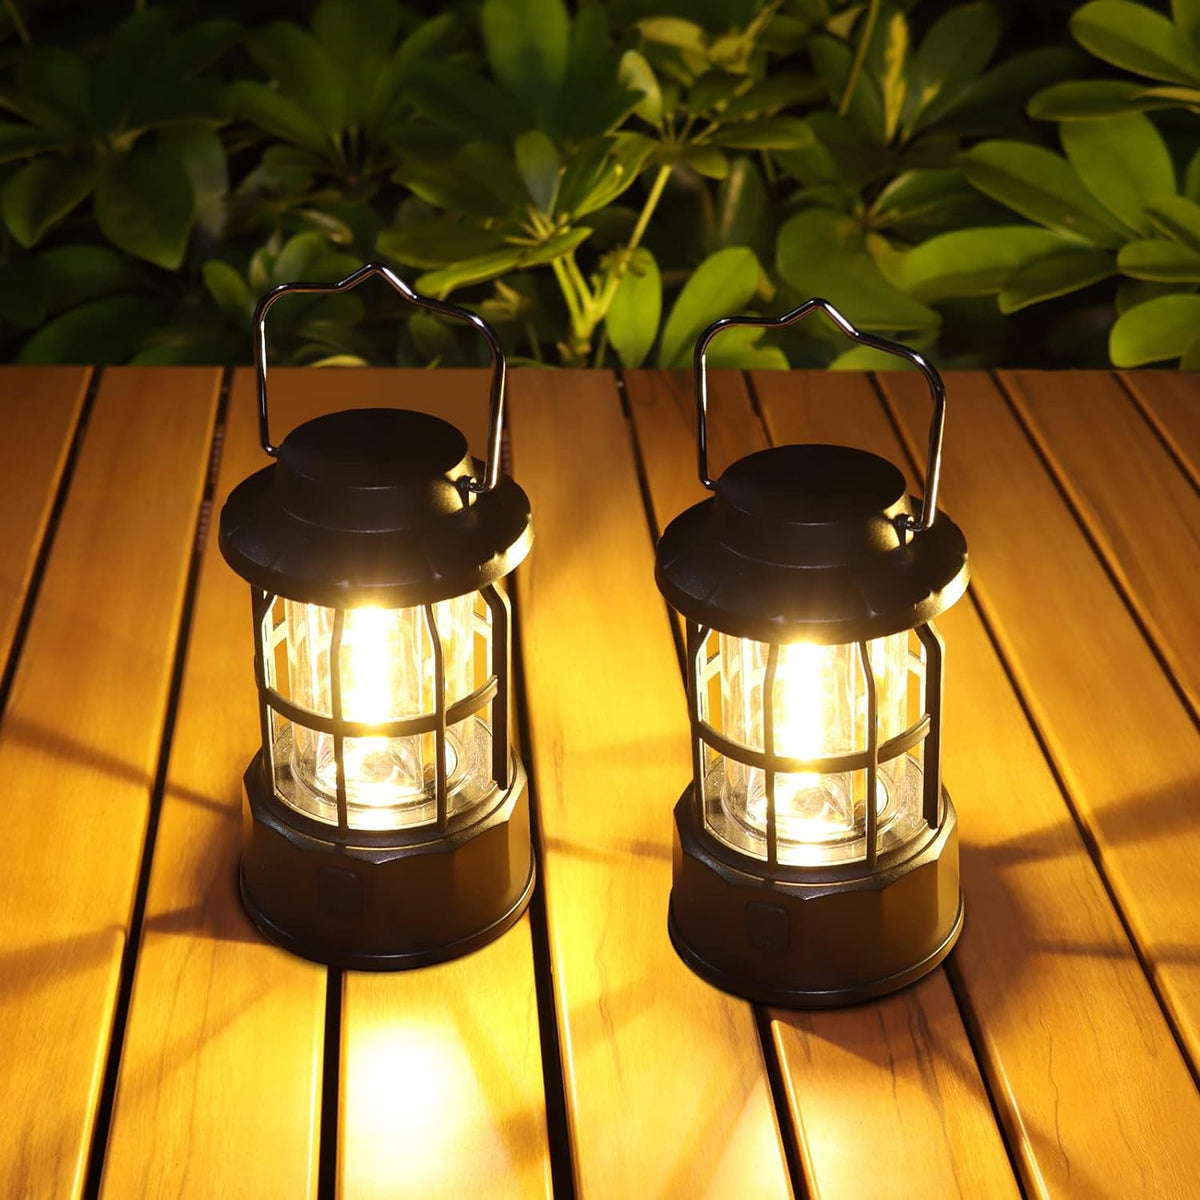 Camping Lanterns Battery Operated, 2 Pack LED Camping Lights Brightness Dimmable, IPX4 Waterproof Camping Lamps, Portable Camping Lamp for Hurricane, Emergency, Home, Shed and More [Energy Class A++]